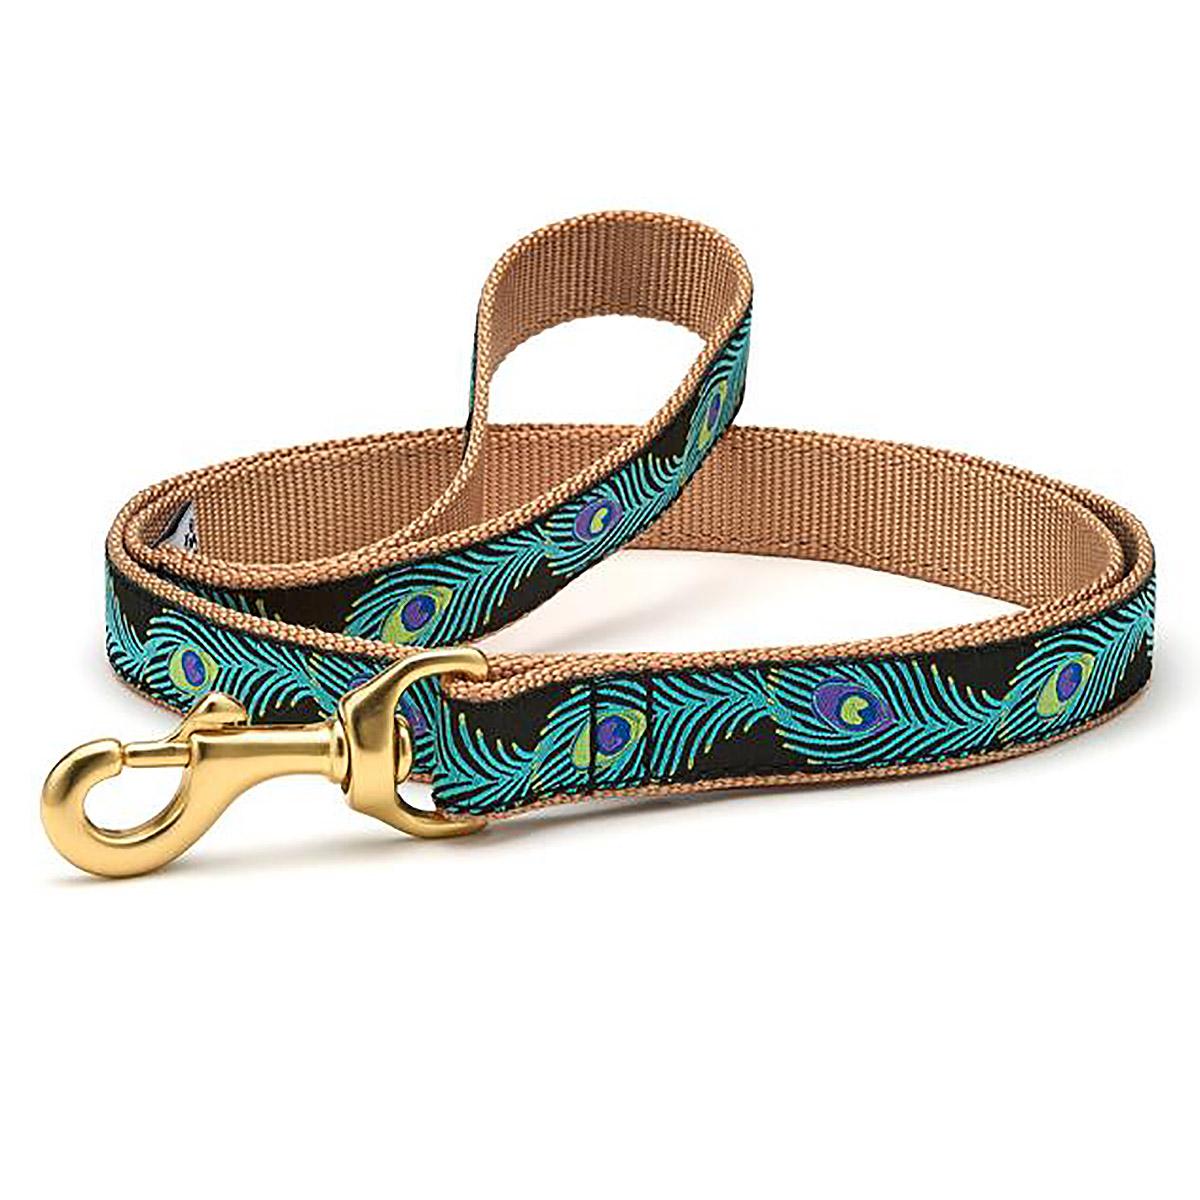 Peacock Dog Leash by Up Country